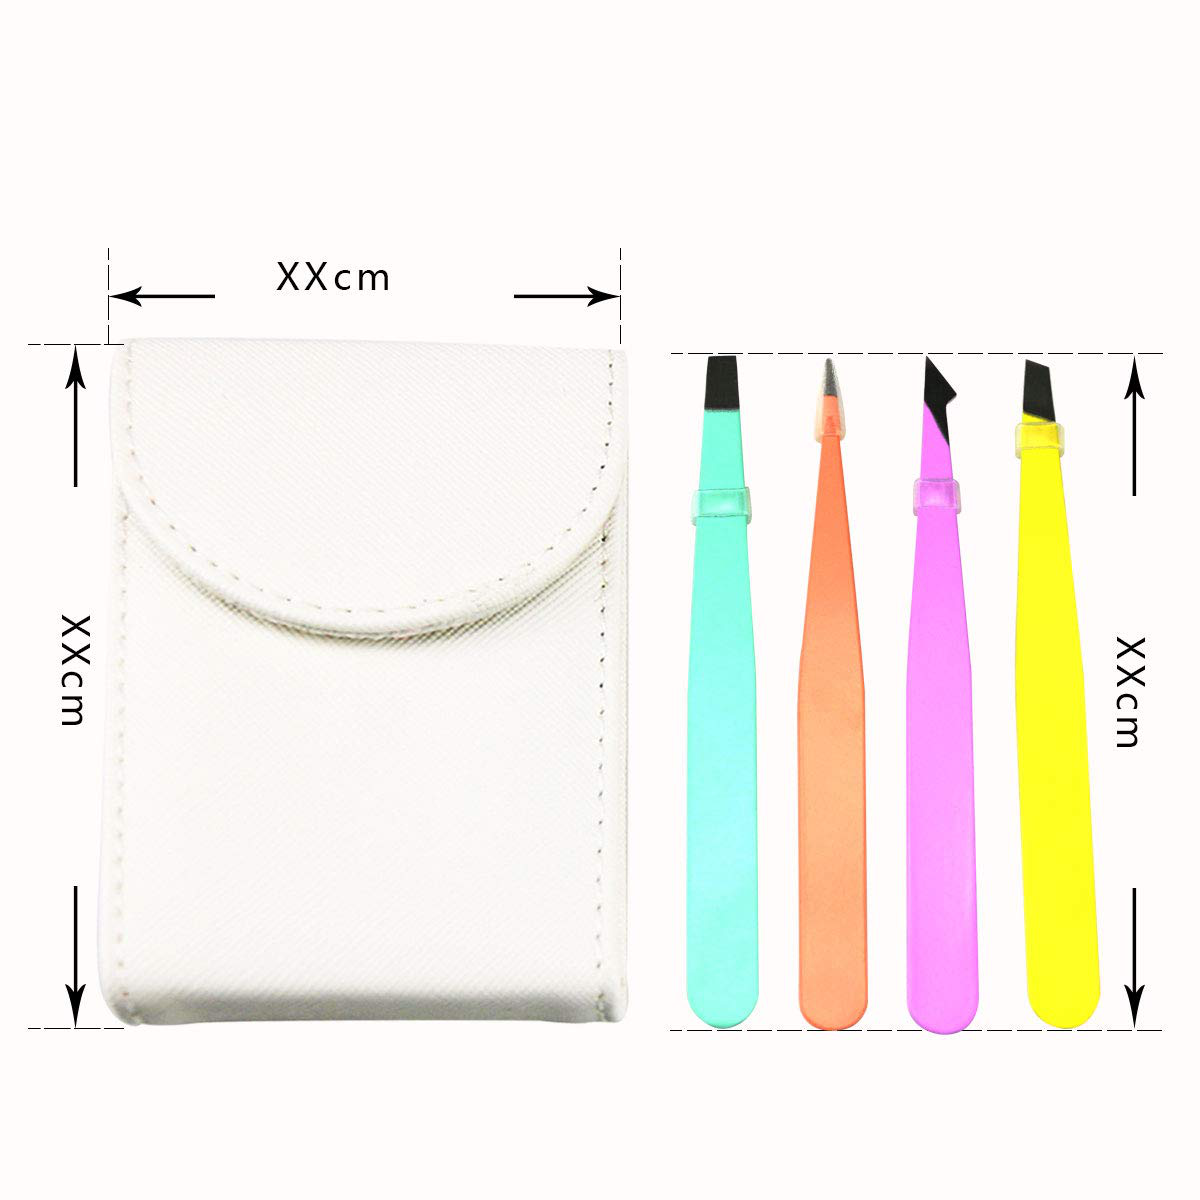 Dr.Nail Tweezers Set for Women'S Eyebrows,4Pcs Best Precision Professional Steel Tweezers Set, Eyelash Extension,Hair Removal - Slant, Pointed, Flat, Pointed with Travel Case (Multicolor)